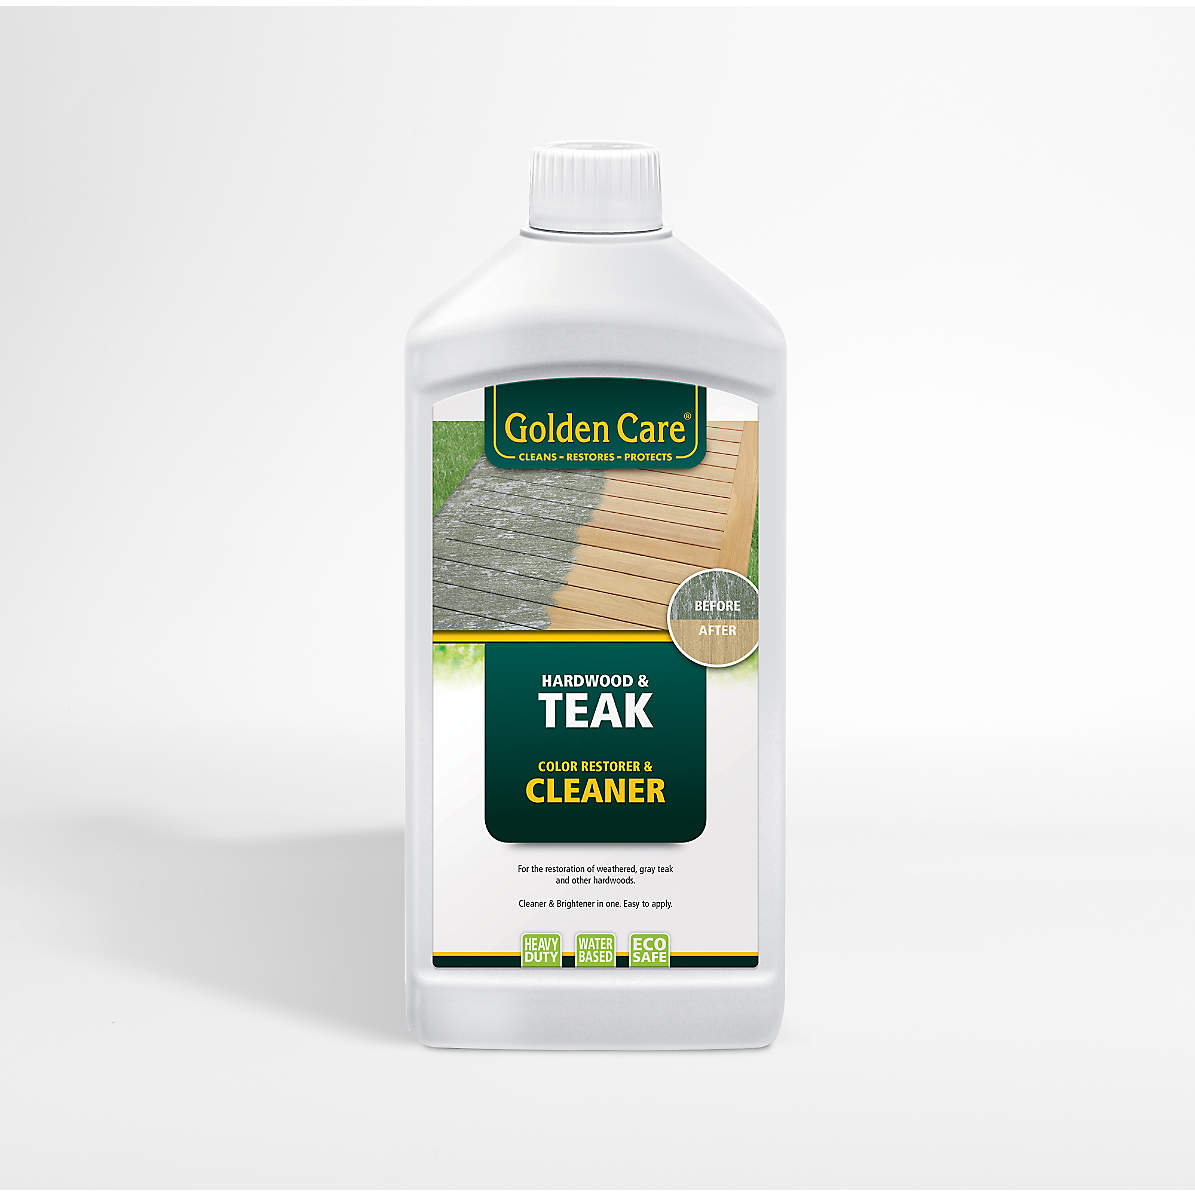 How to care for Teak Wood